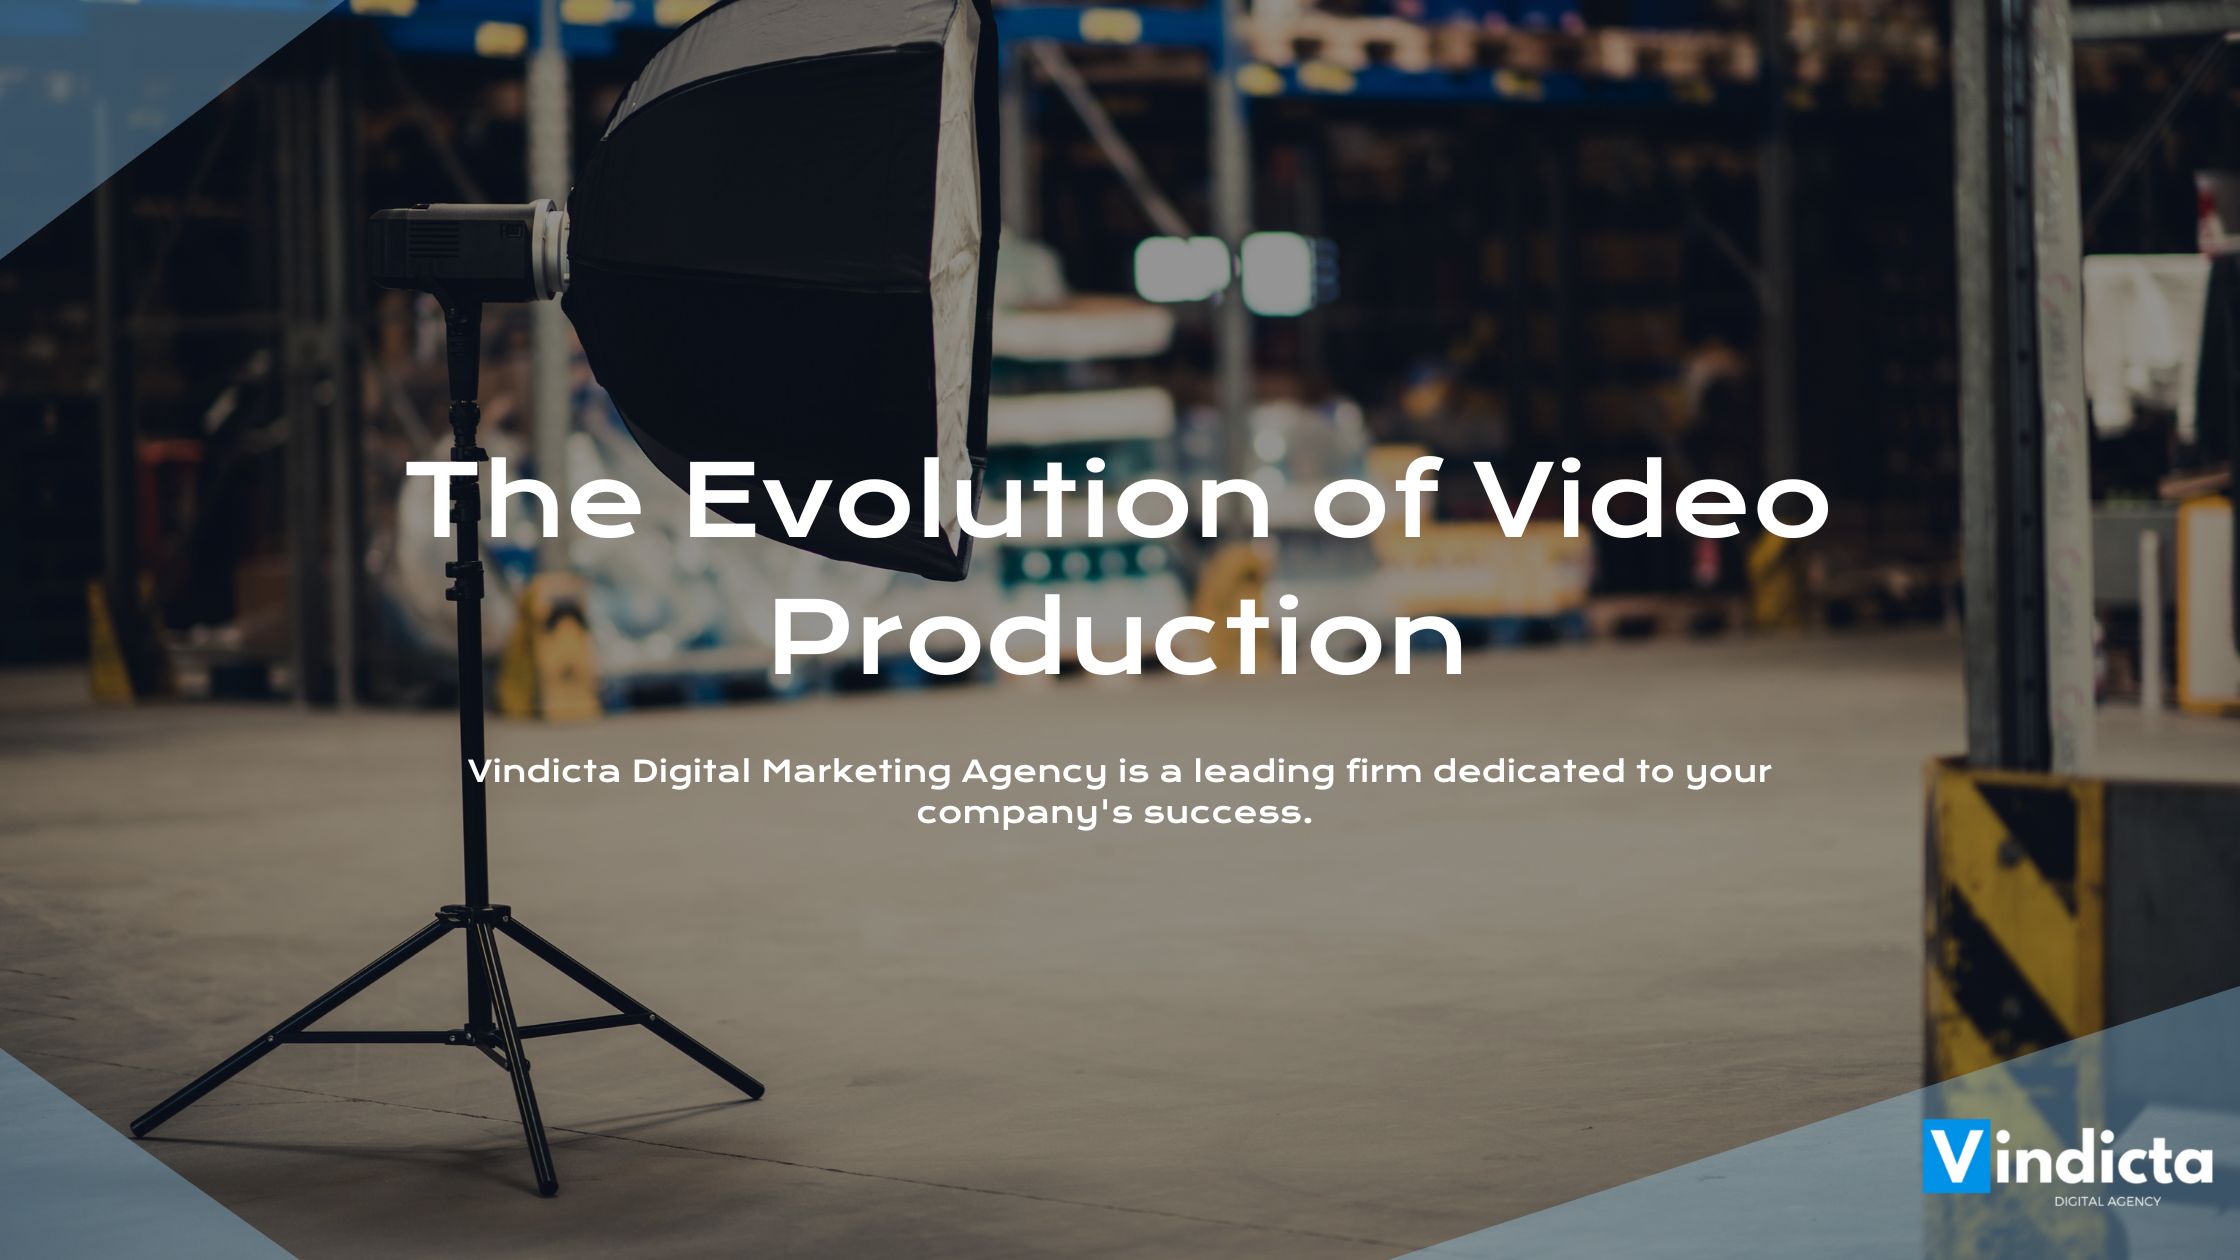 The Evolution of Video Production